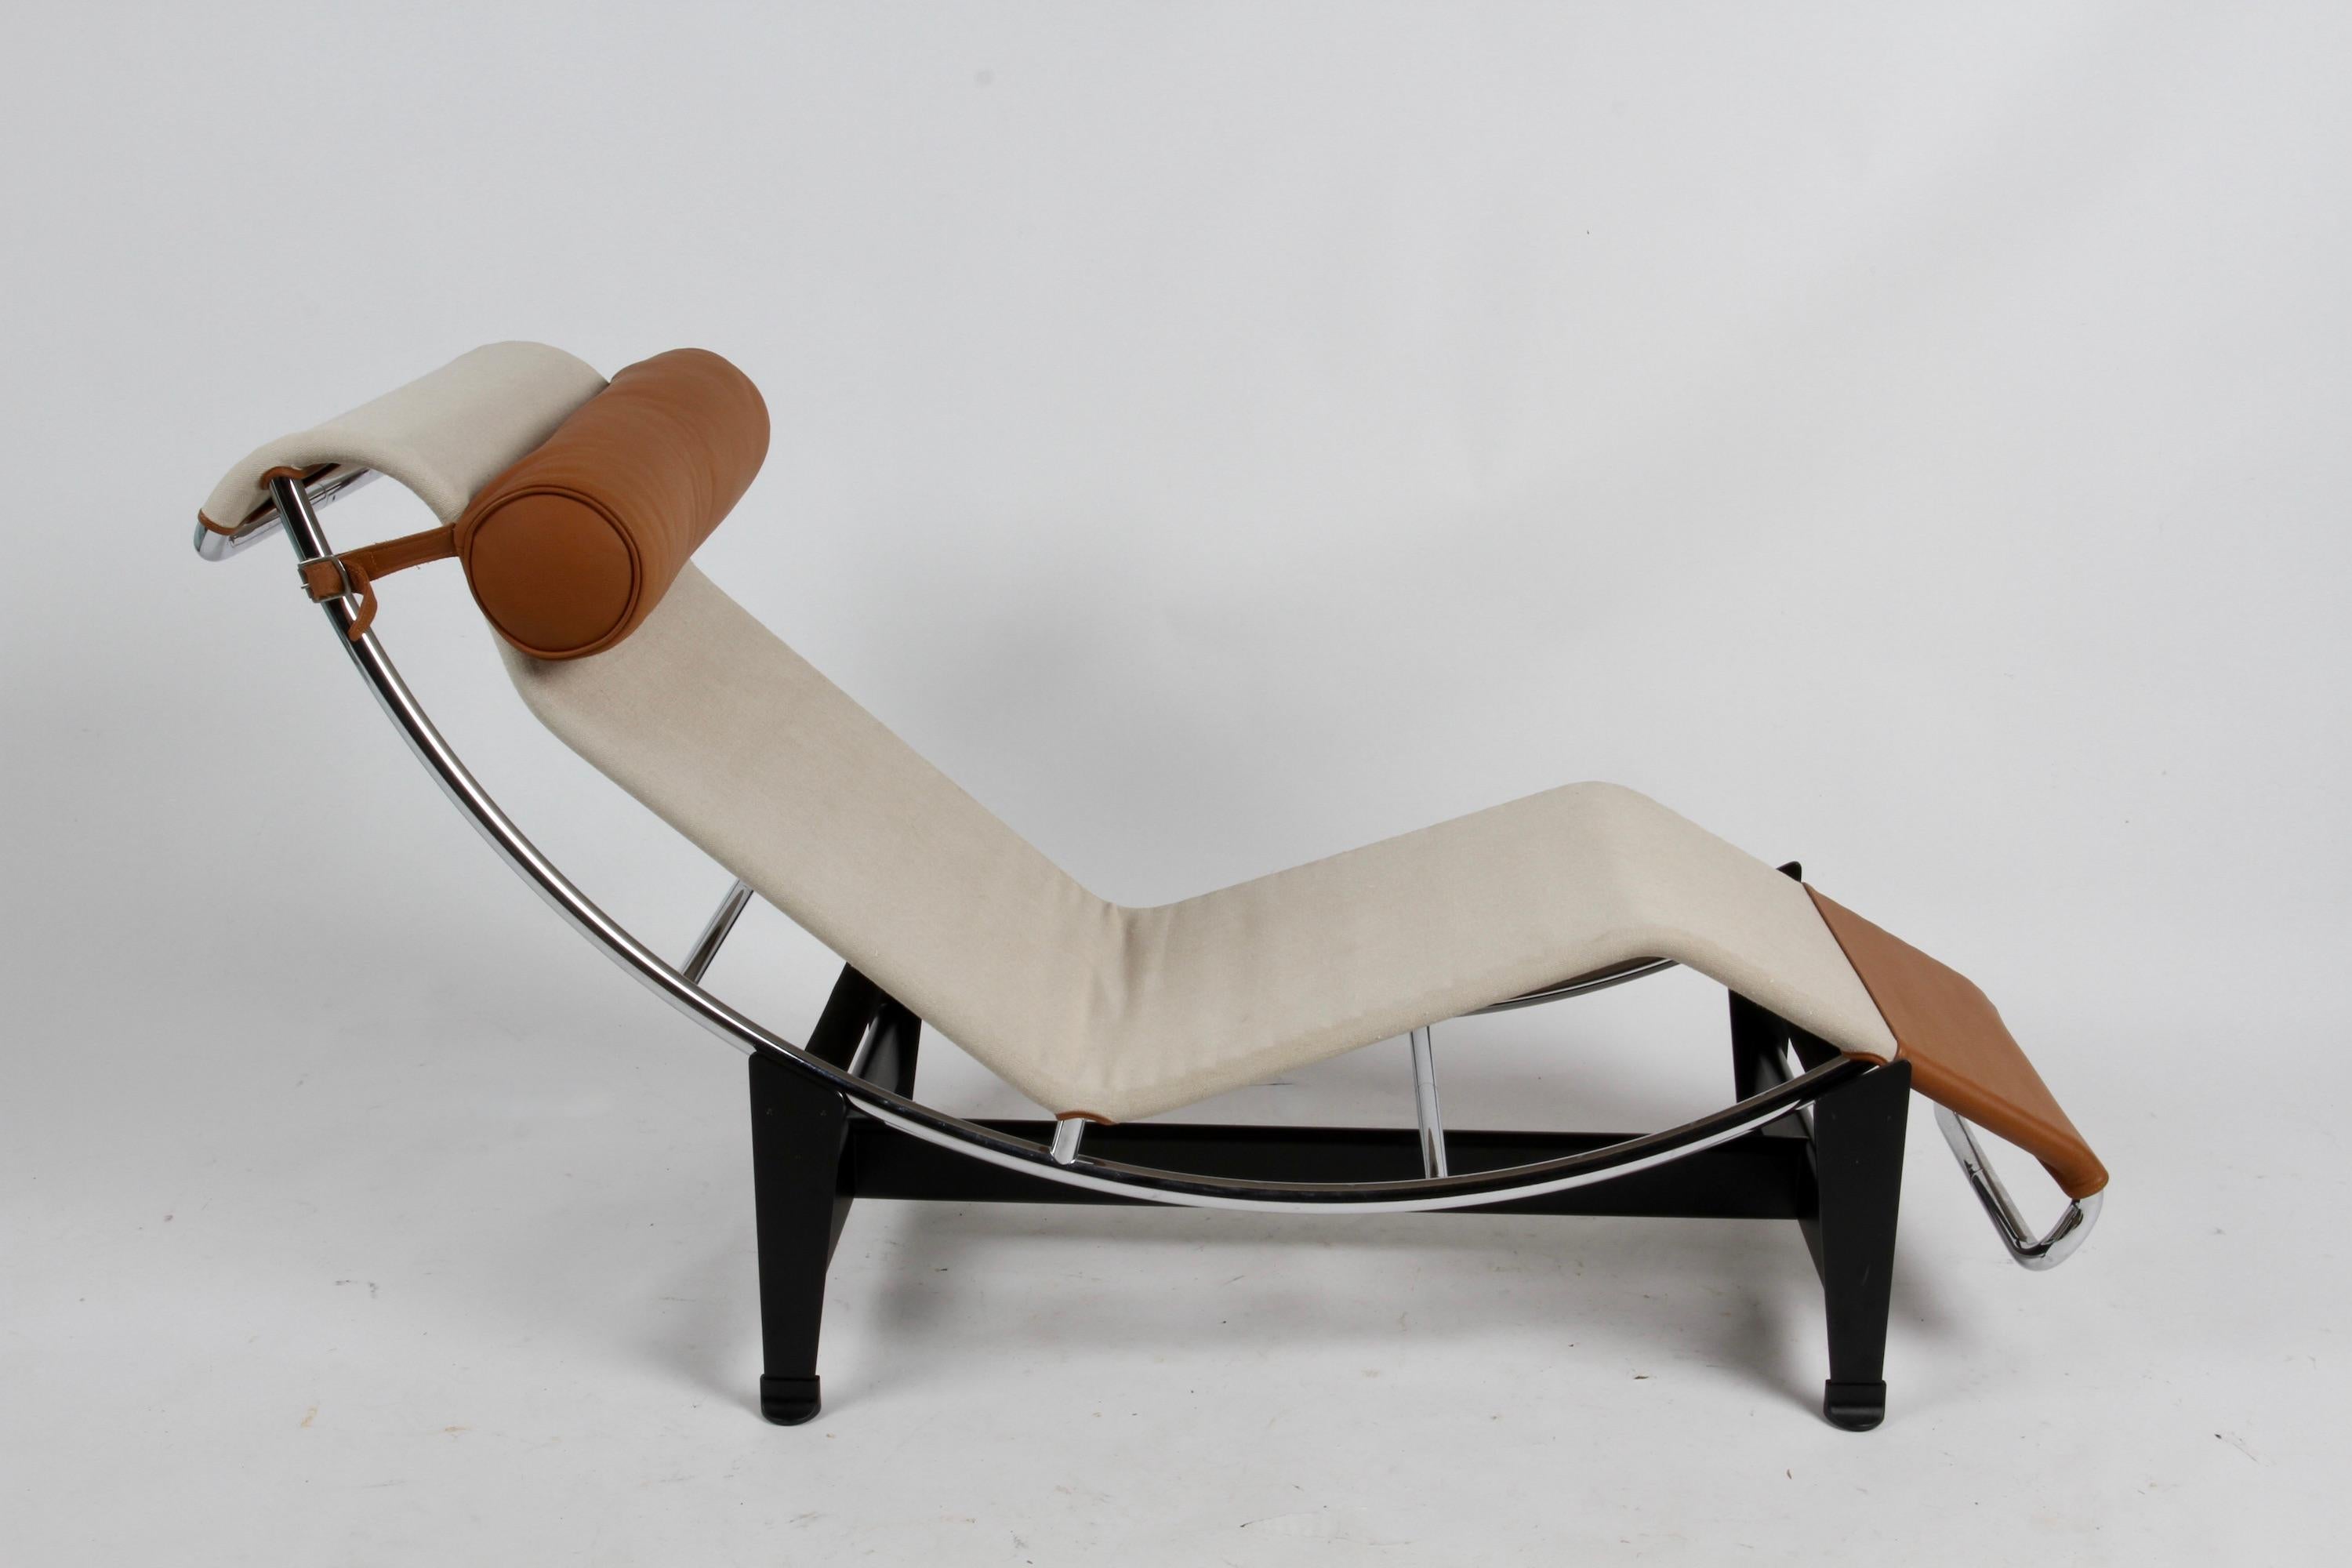 Bauhaus Lc4 Chaise Lounge Canvas & Leather, Charlotte Perriand & Le Corbusier, Cassina